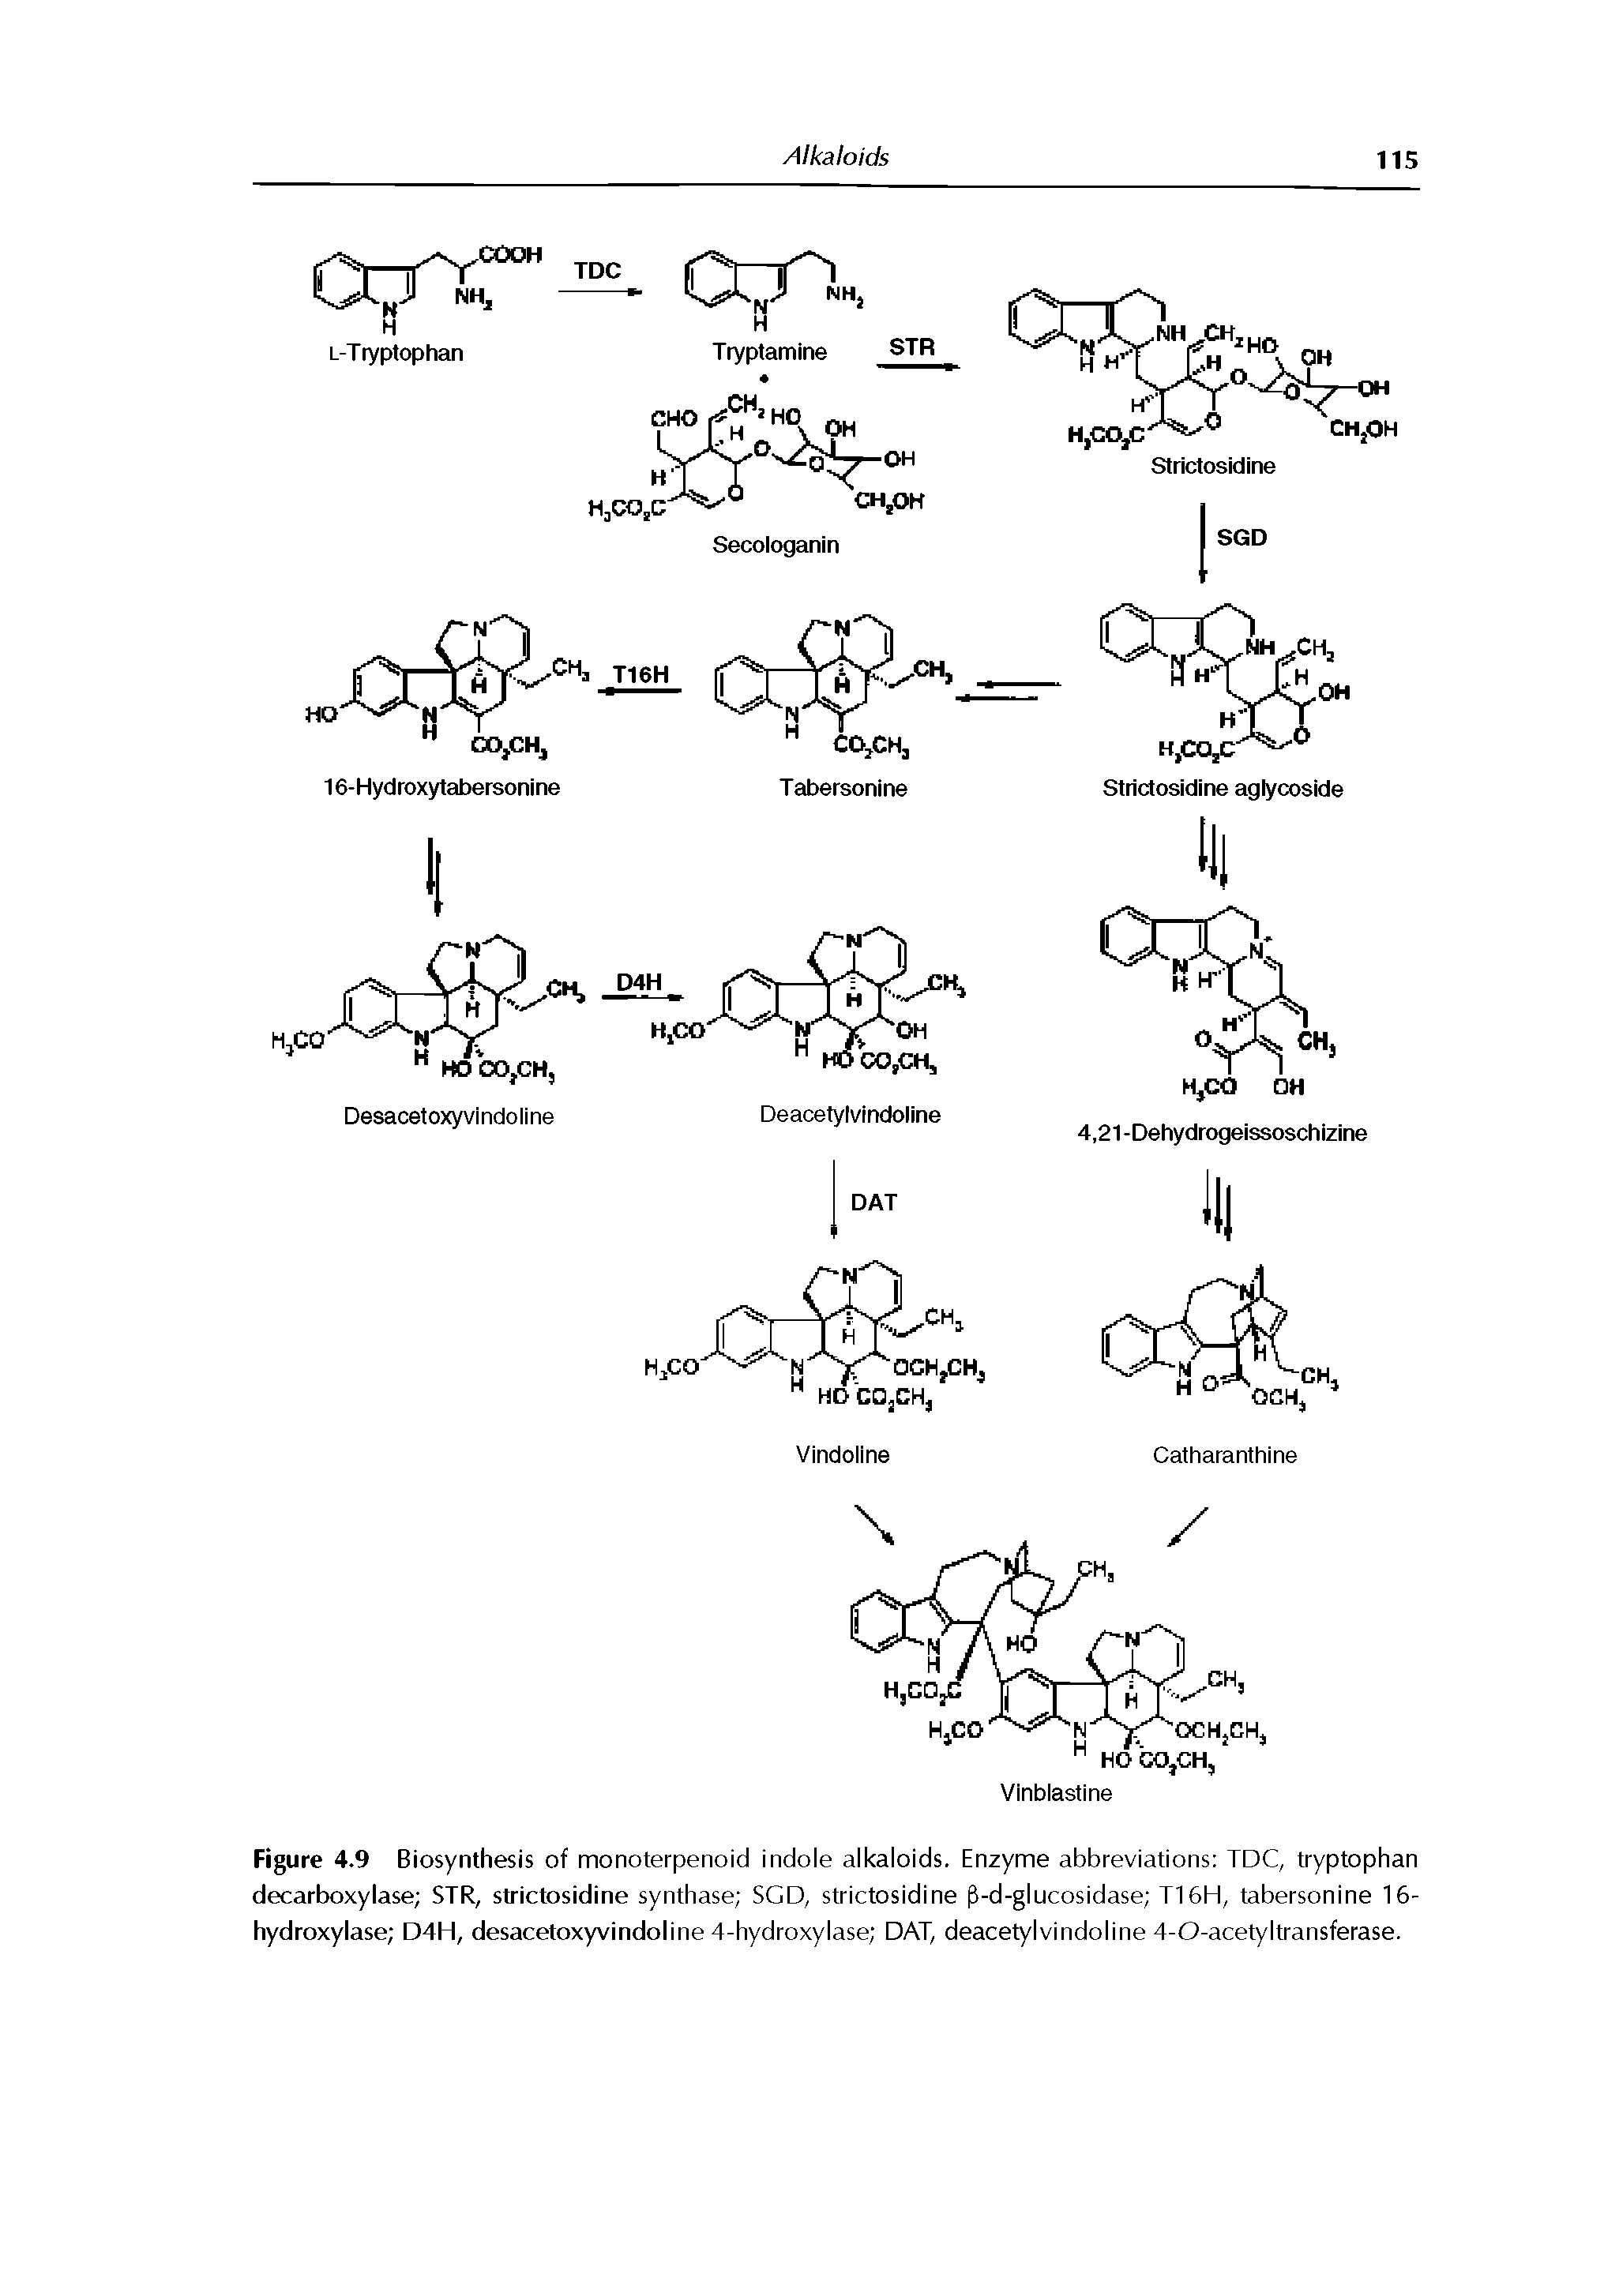 Figure 4.9 Biosynthesis of monoterpenoid indole alkaloids. Enzyme abbreviations TDC, tryptophan decarboxylase STR, strictosidine synthase SGD, strictosidine f-d-glucosidase T16H, tabersonine 16-hydroxylase D4H, desacetoxyvindoline 4-hydroxylase DAT, deacetylvindoline 4-O-acetyltransferase.